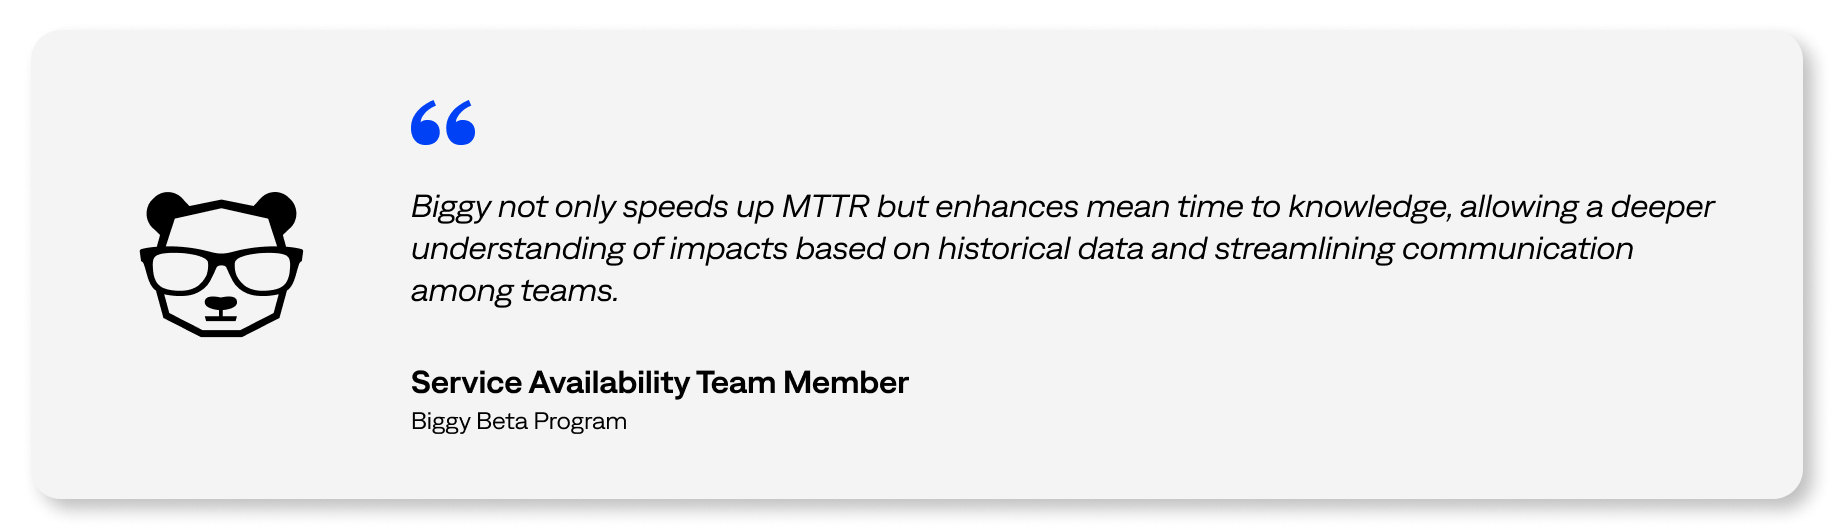 Biggy not only speeds up MTTR but enhances mean time to knowledge, allowing a deeper understanding of impacts based on historical data and streamlining communication among teams. -Service Availability Team Member, Biggy Beta Program